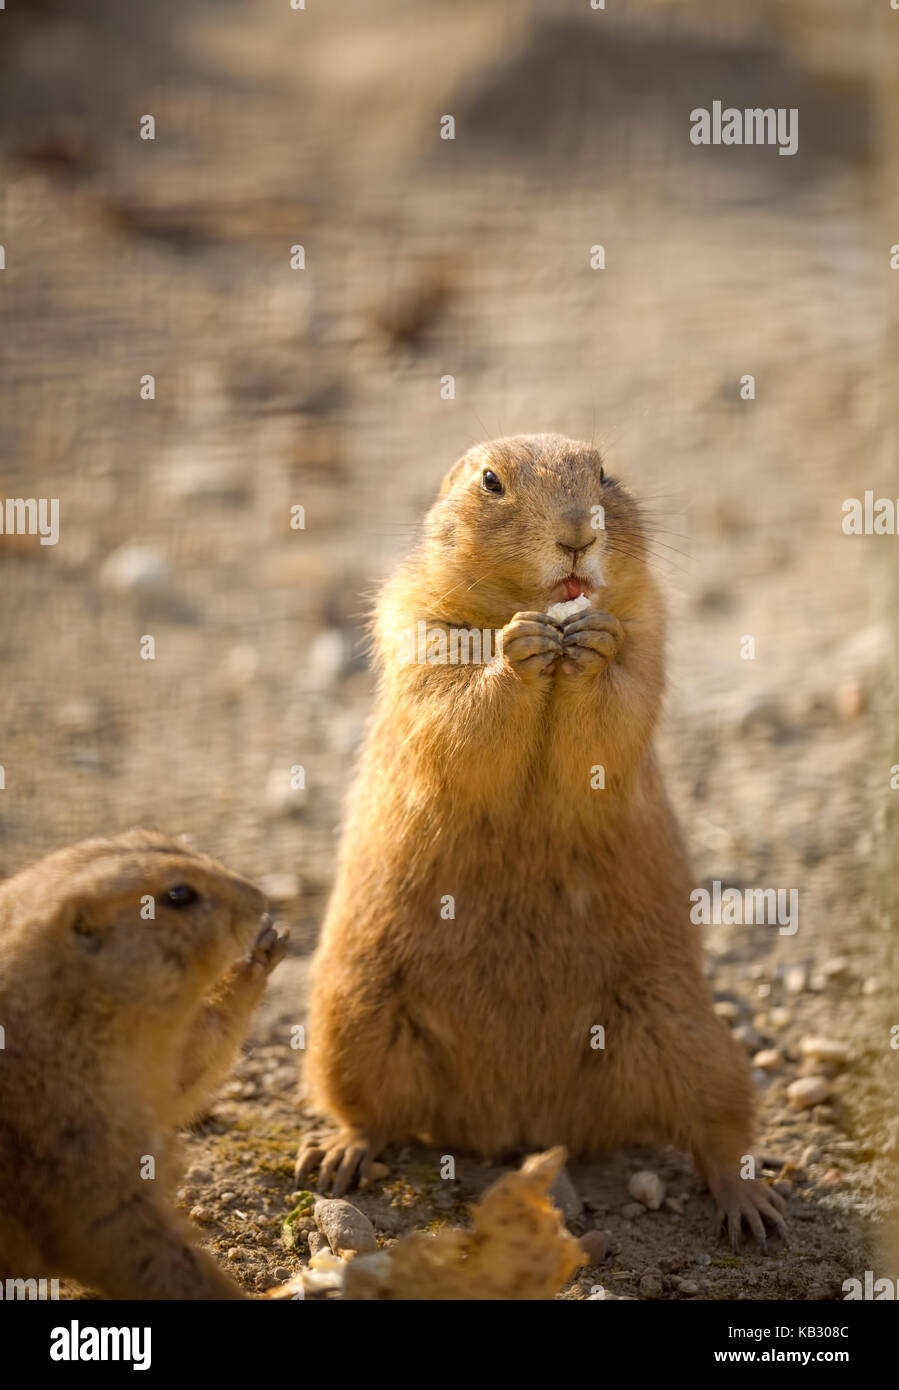 Beaver standing and eating Stock Photo